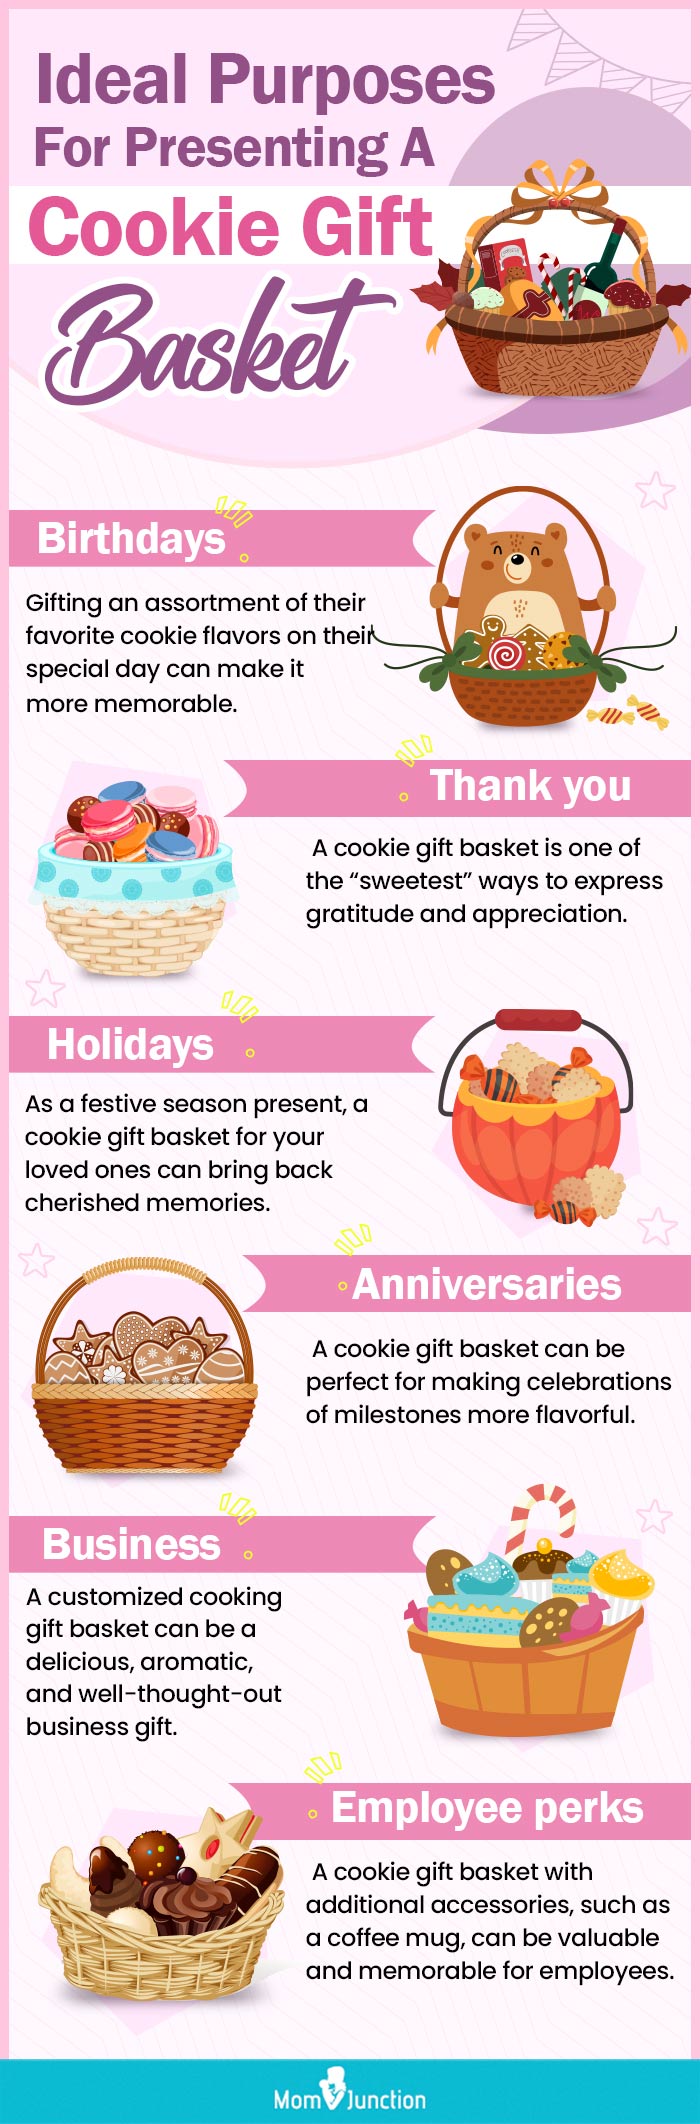 Ideal Purposes For Presenting A Cookie Gift Basket (infographic)